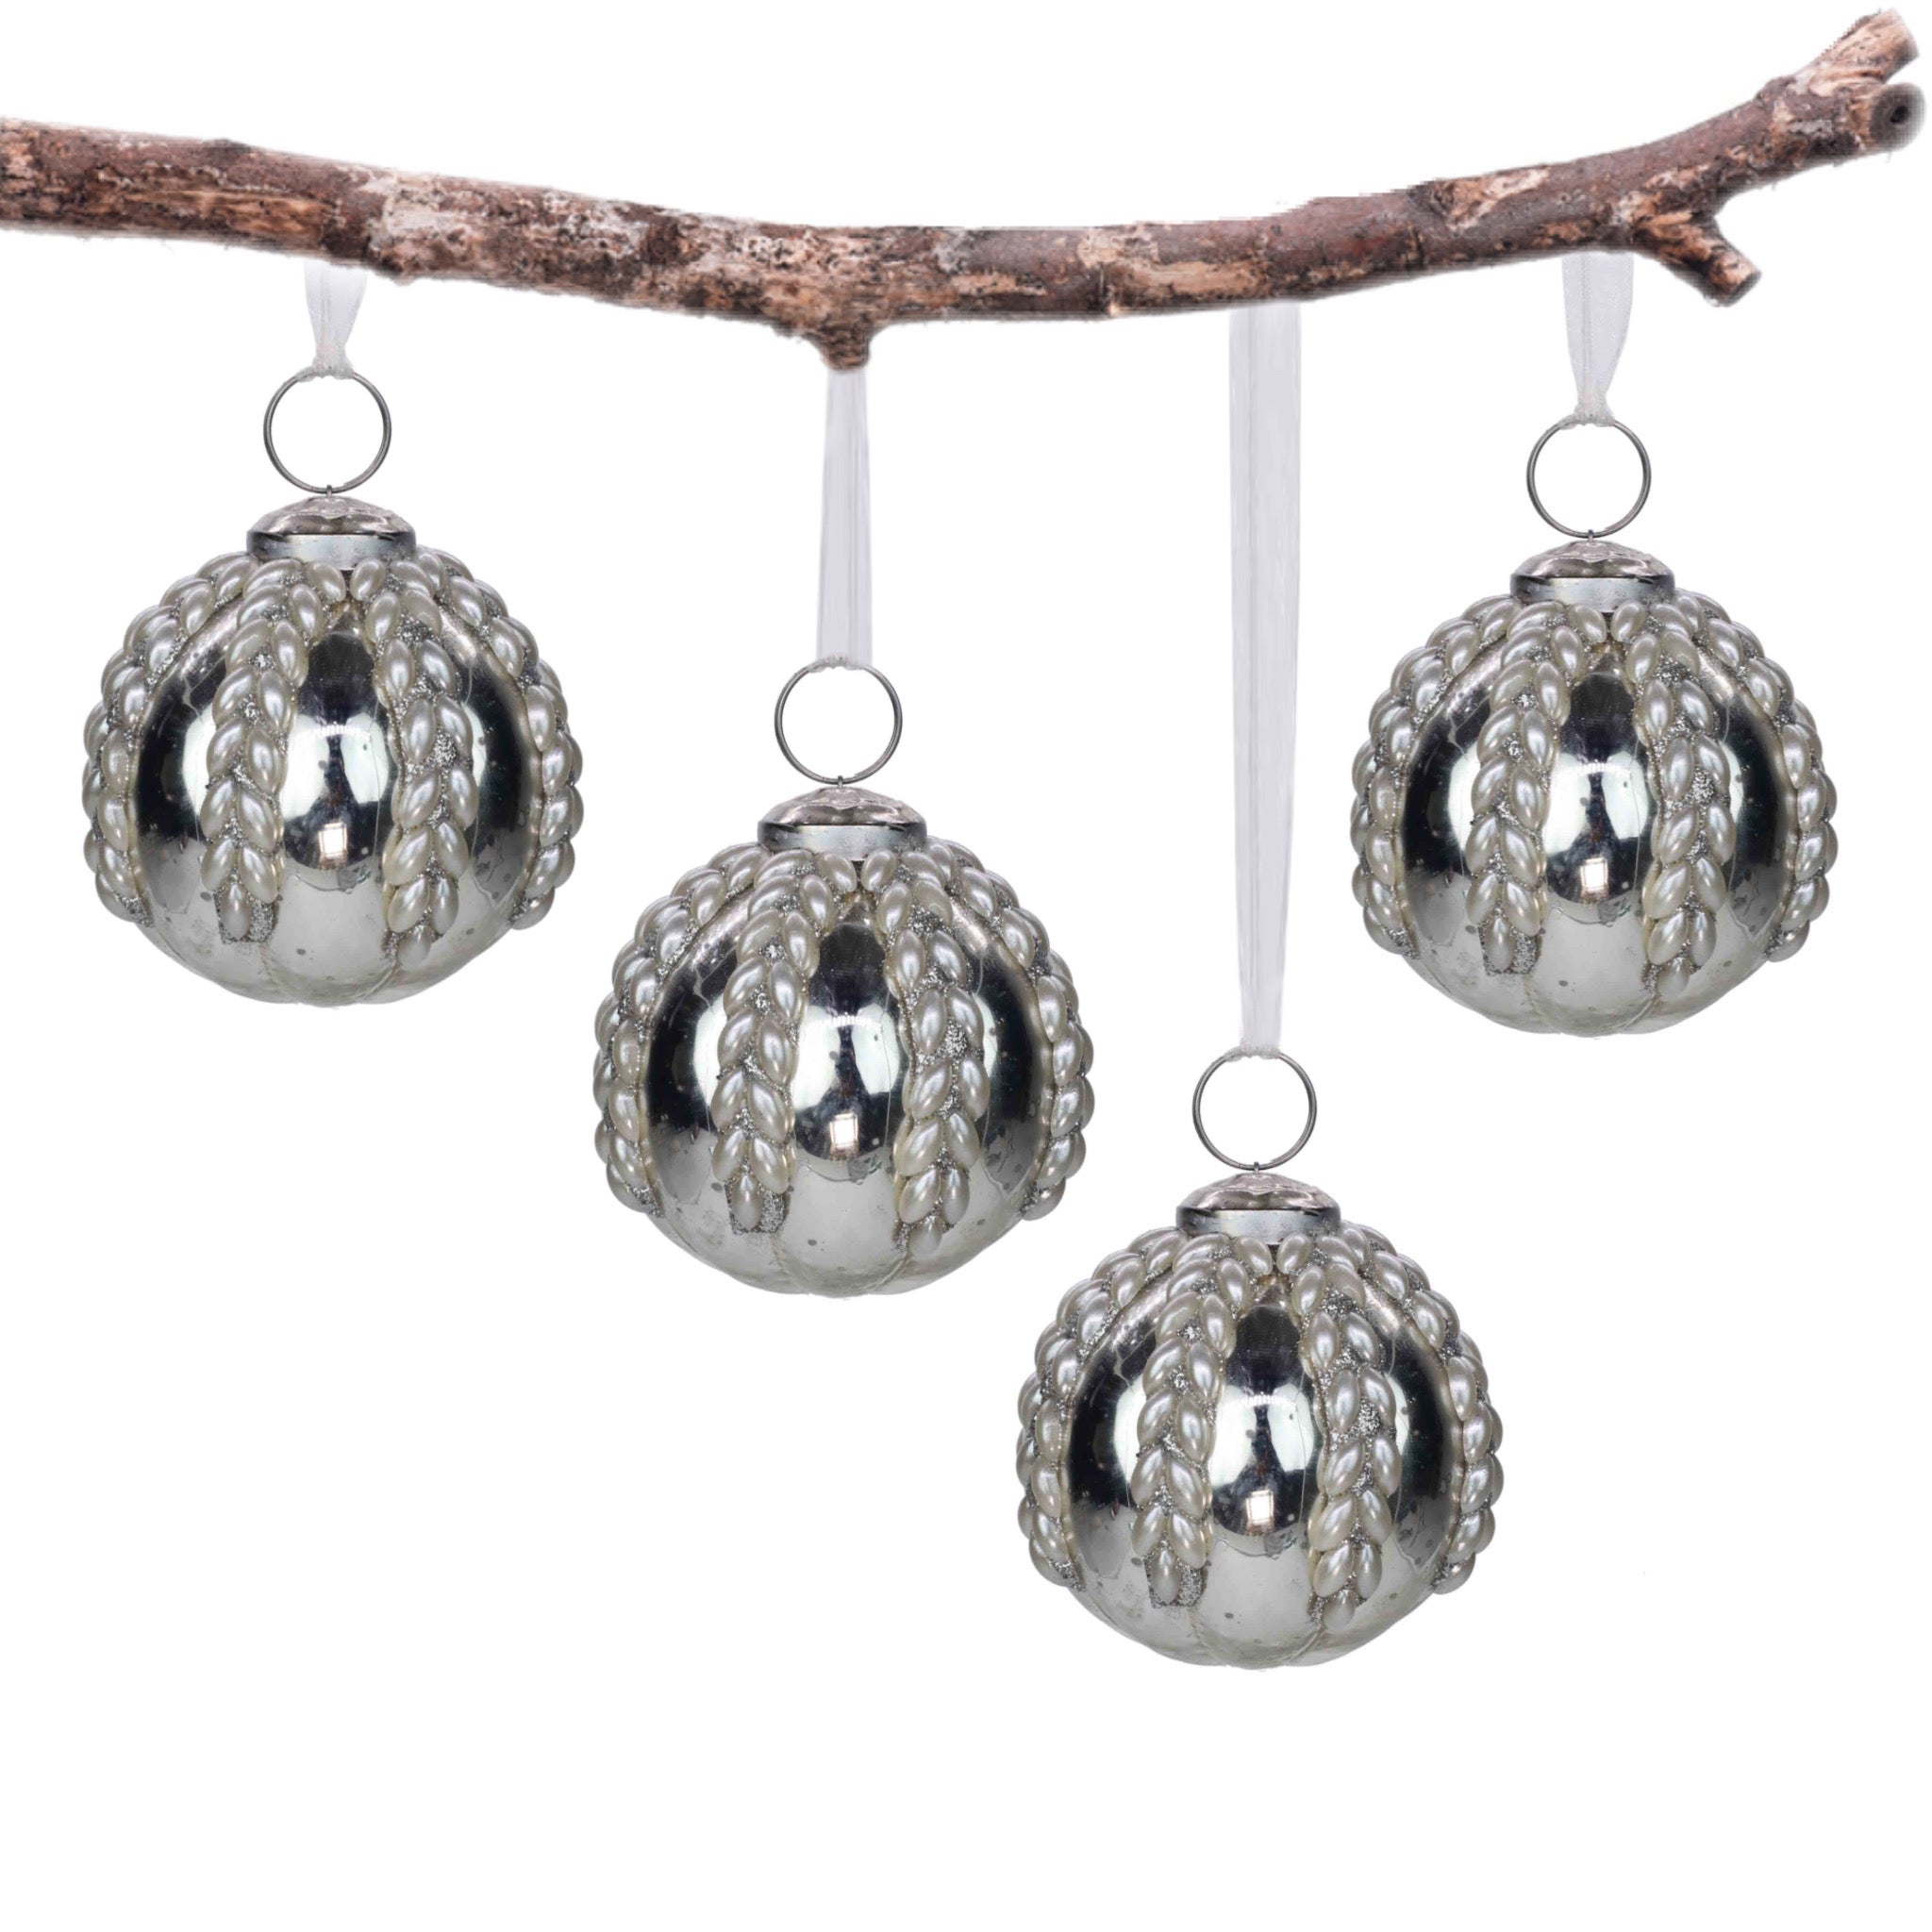 Timeless Classic Glass Tree Ornament in Silver & Cream, Boxed Set of 4